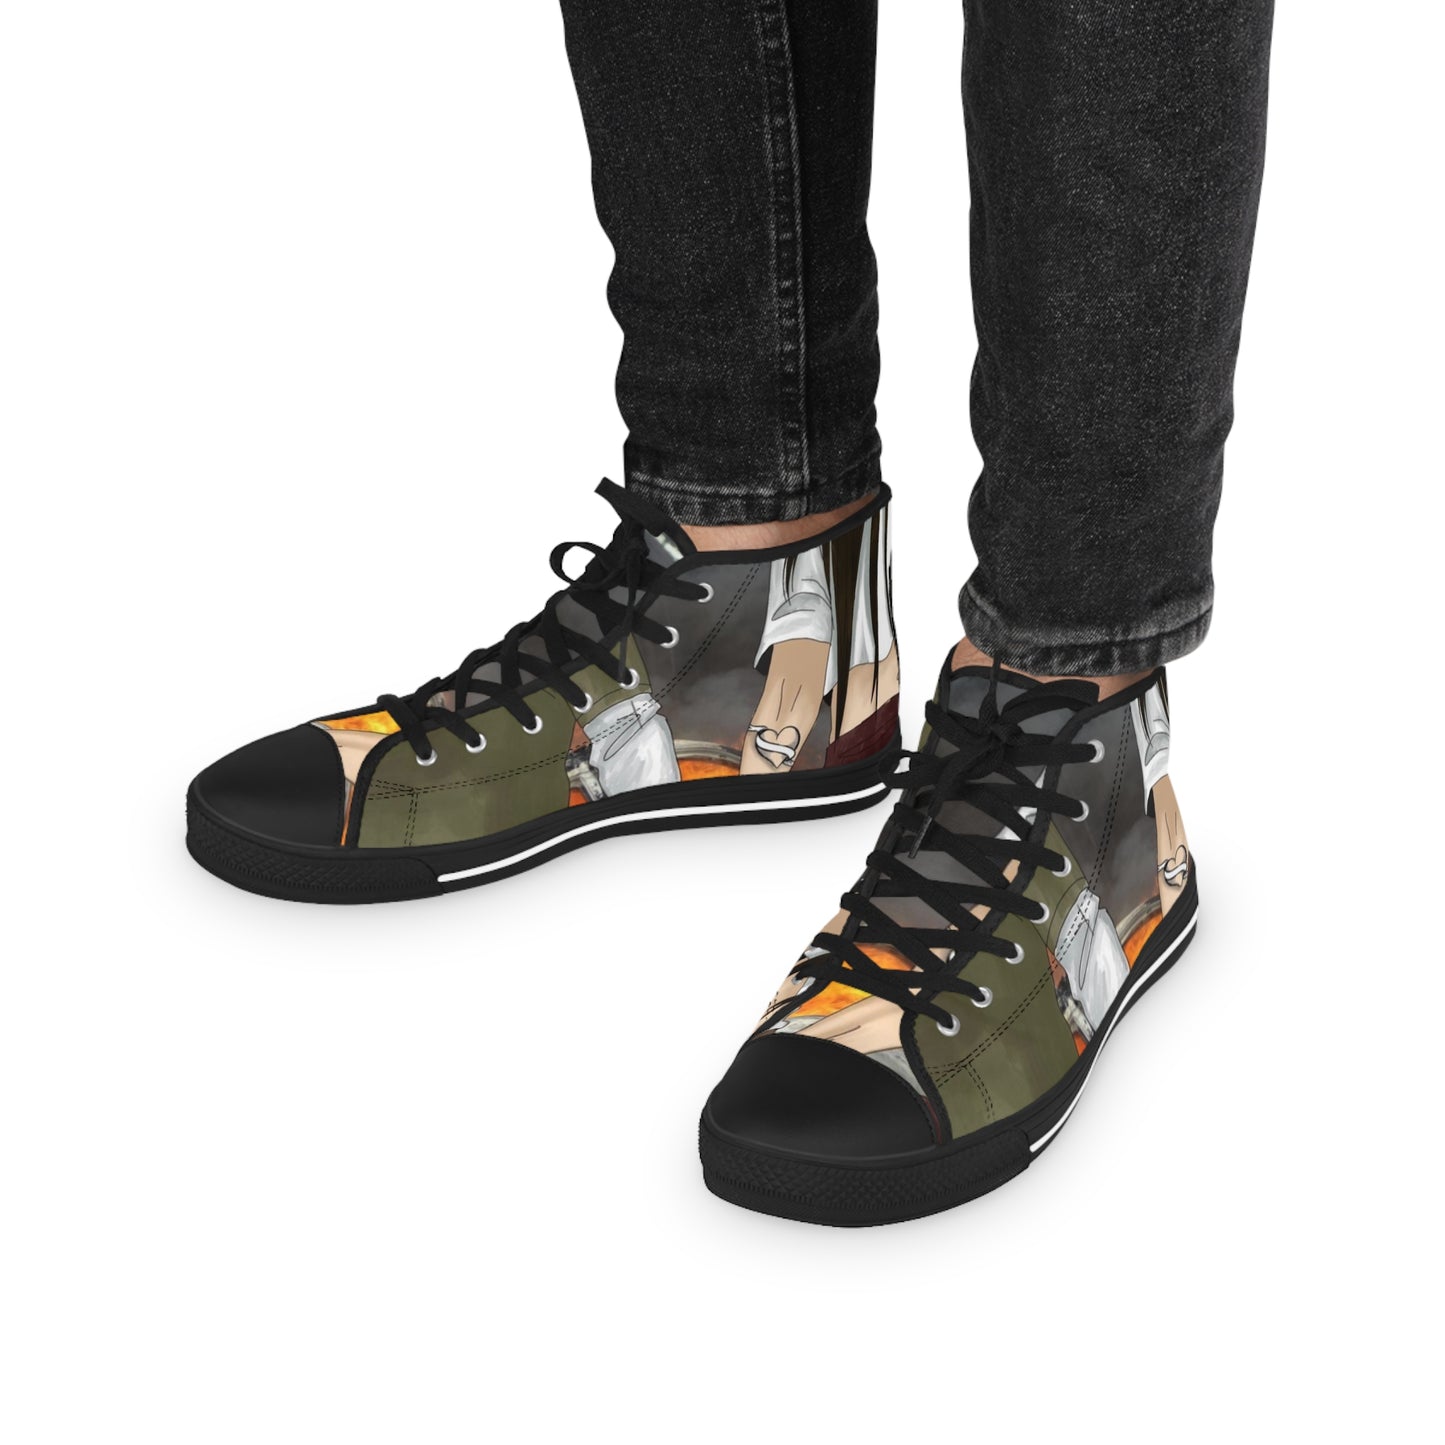 “Through hell and back” Men's High Top Sneakers